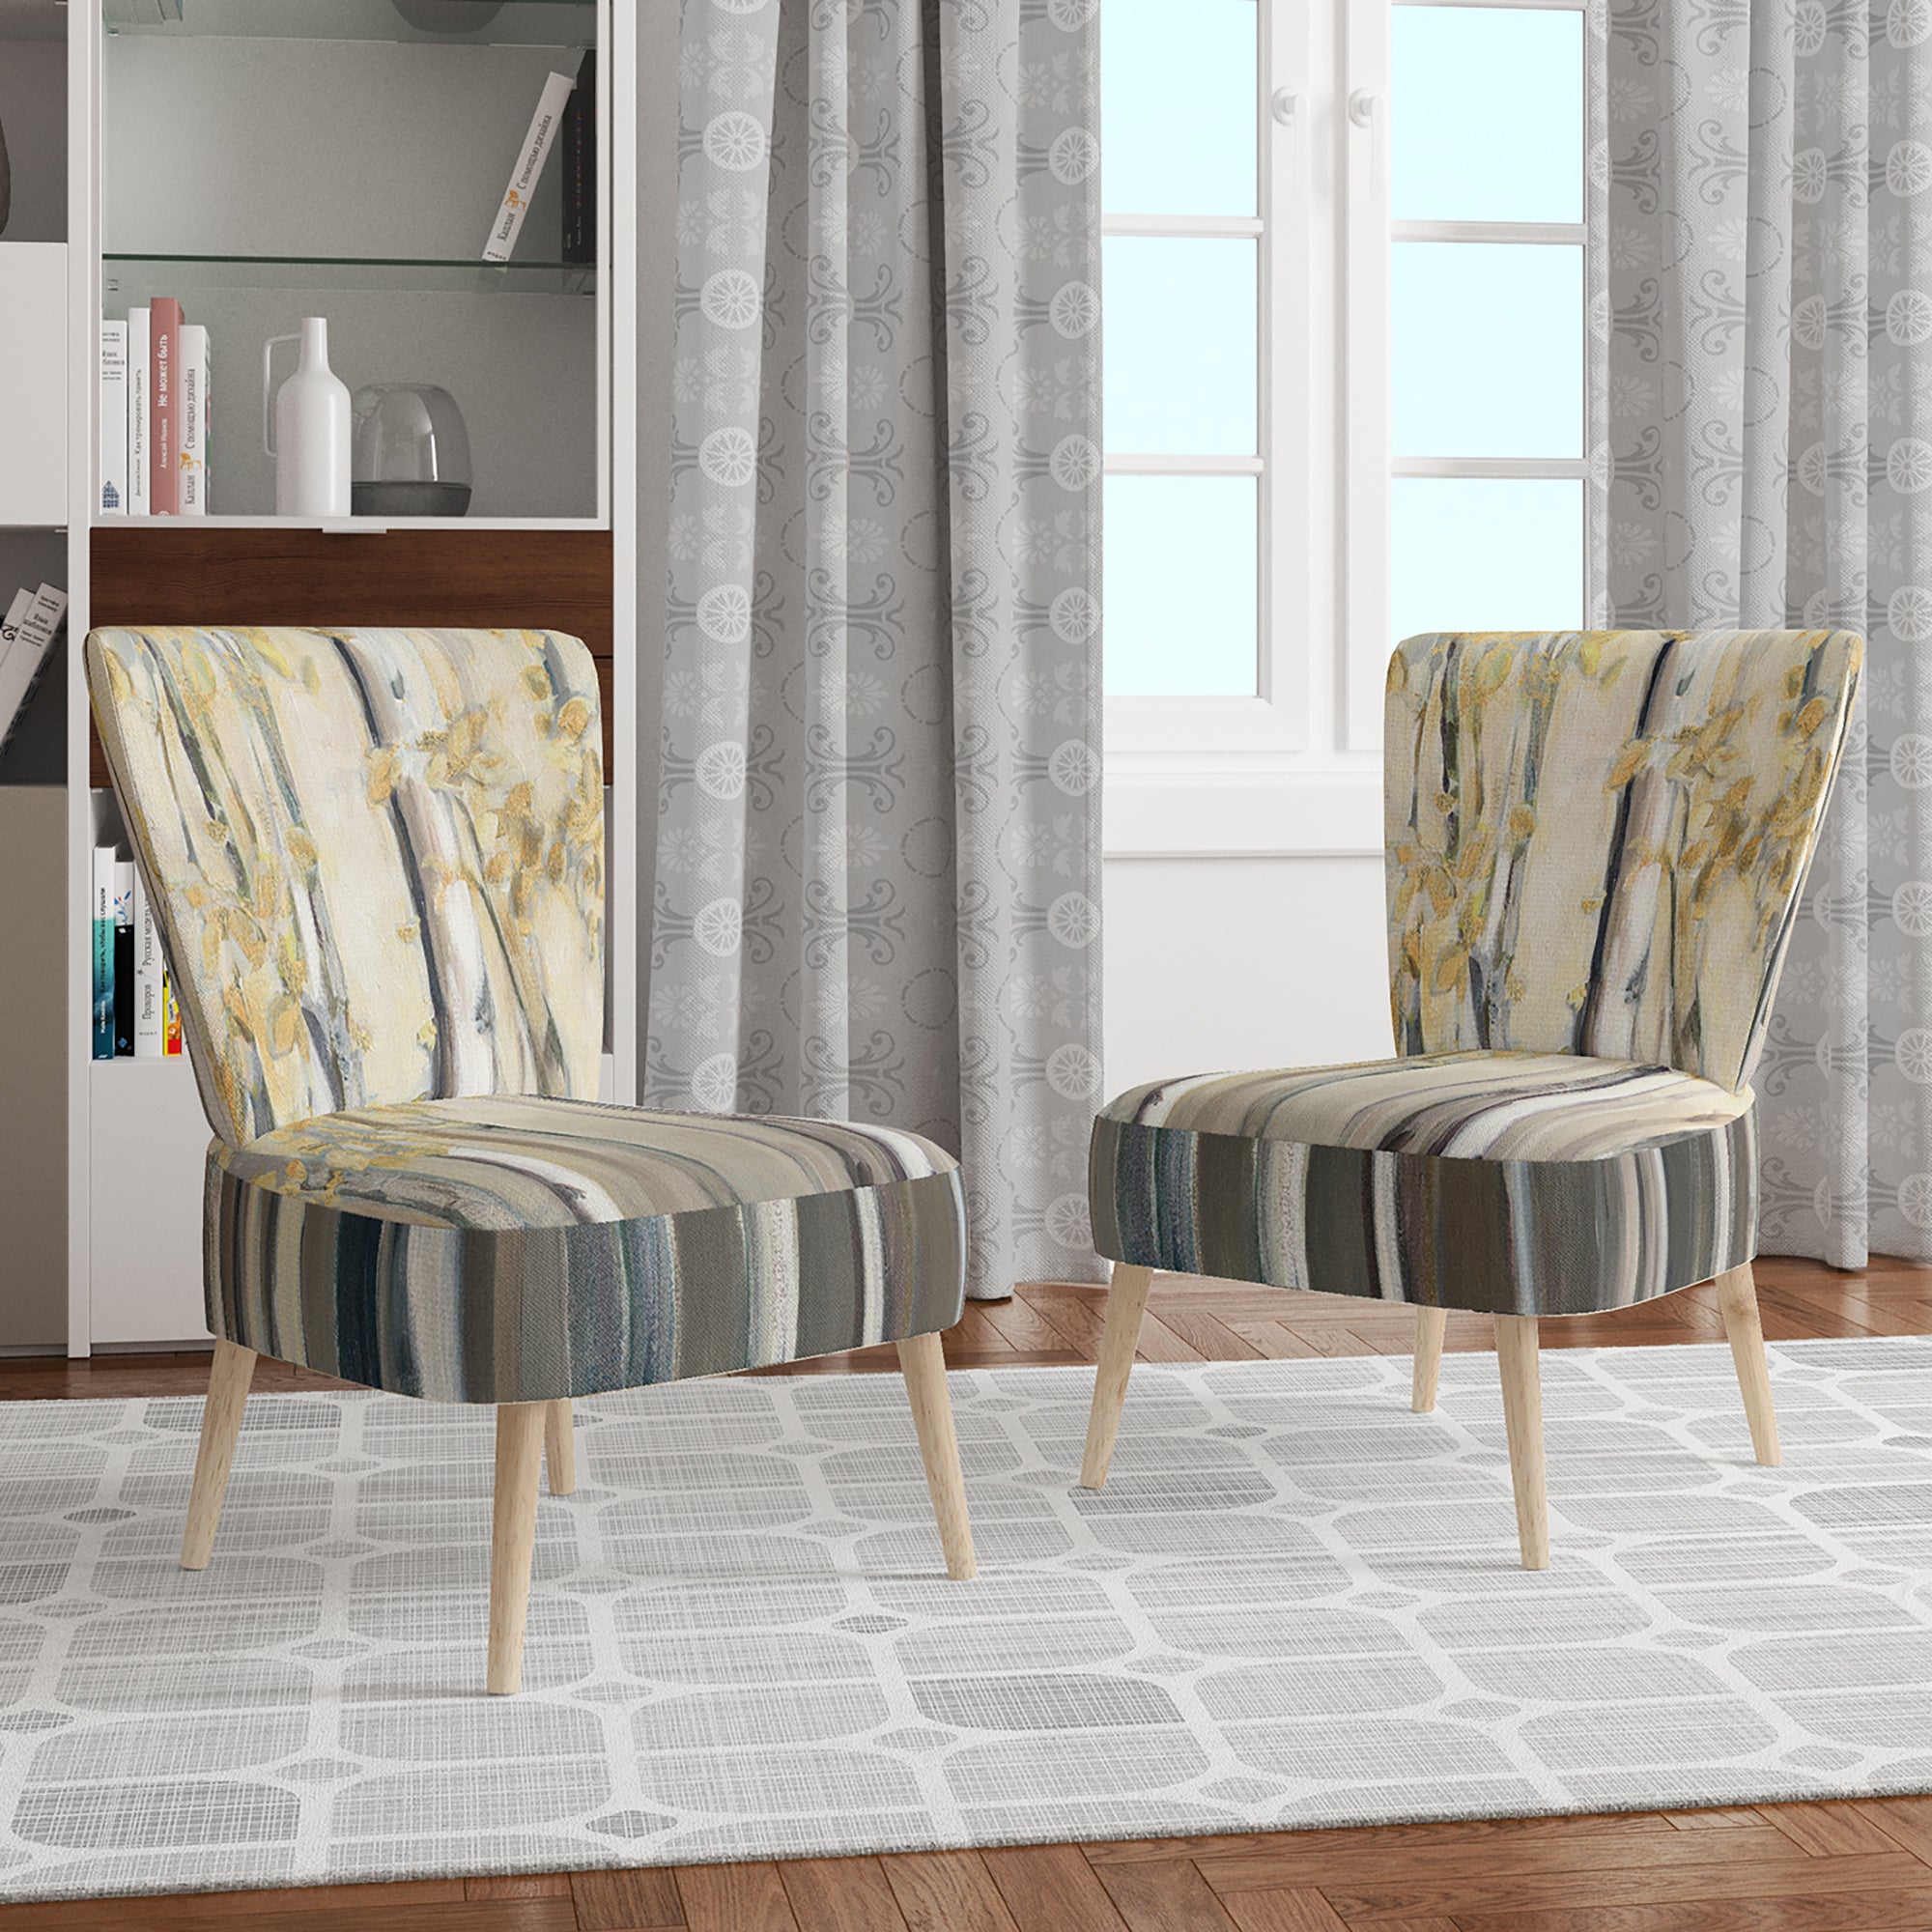 Golden Birch Forest I Landscapes Accent Chair